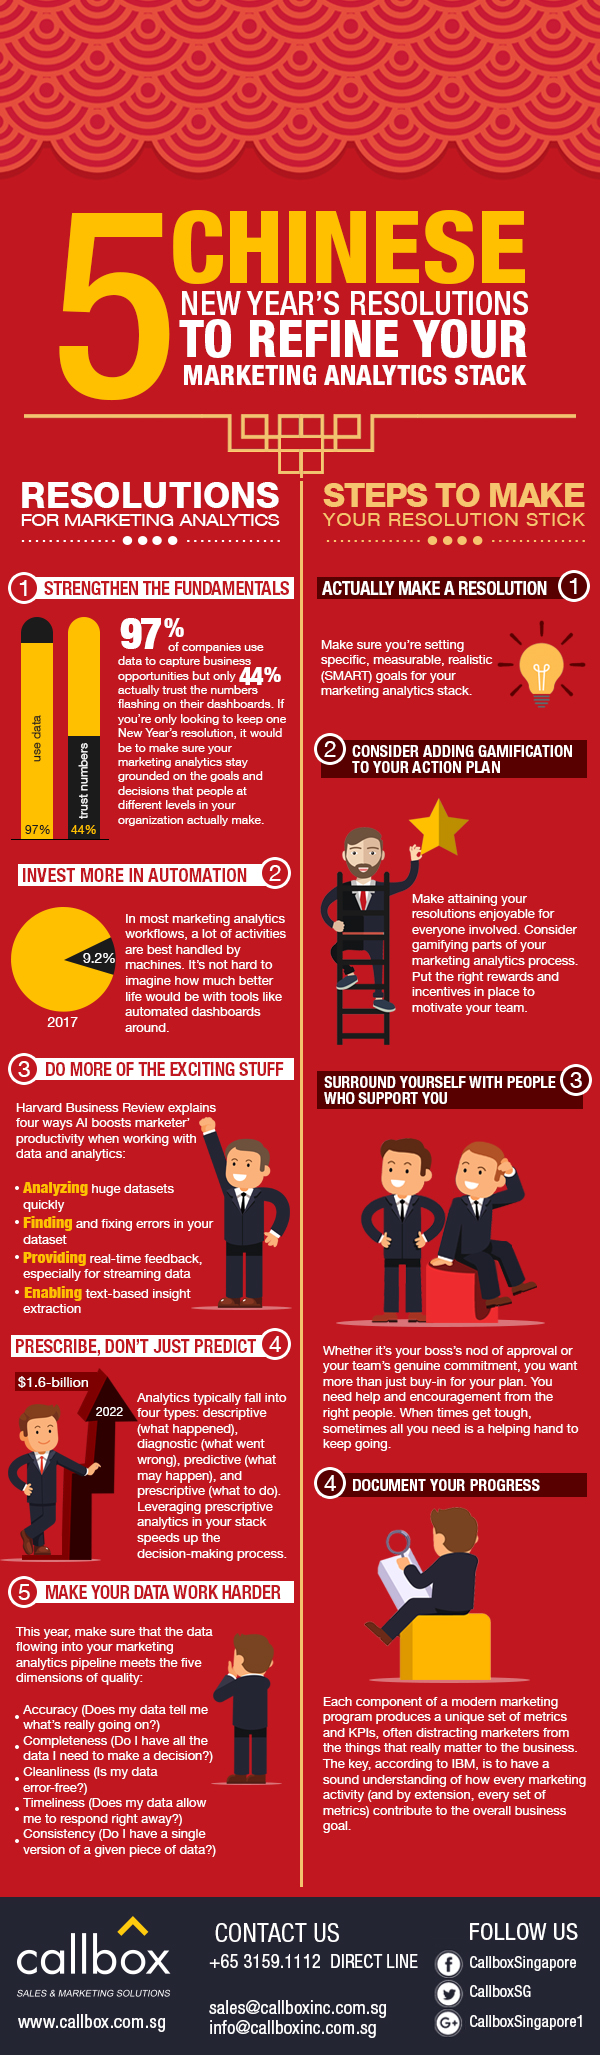 5 Chinese New Year’s Resolutions to Refine Your Marketing Analytics Stack [INFOGRAPHIC]